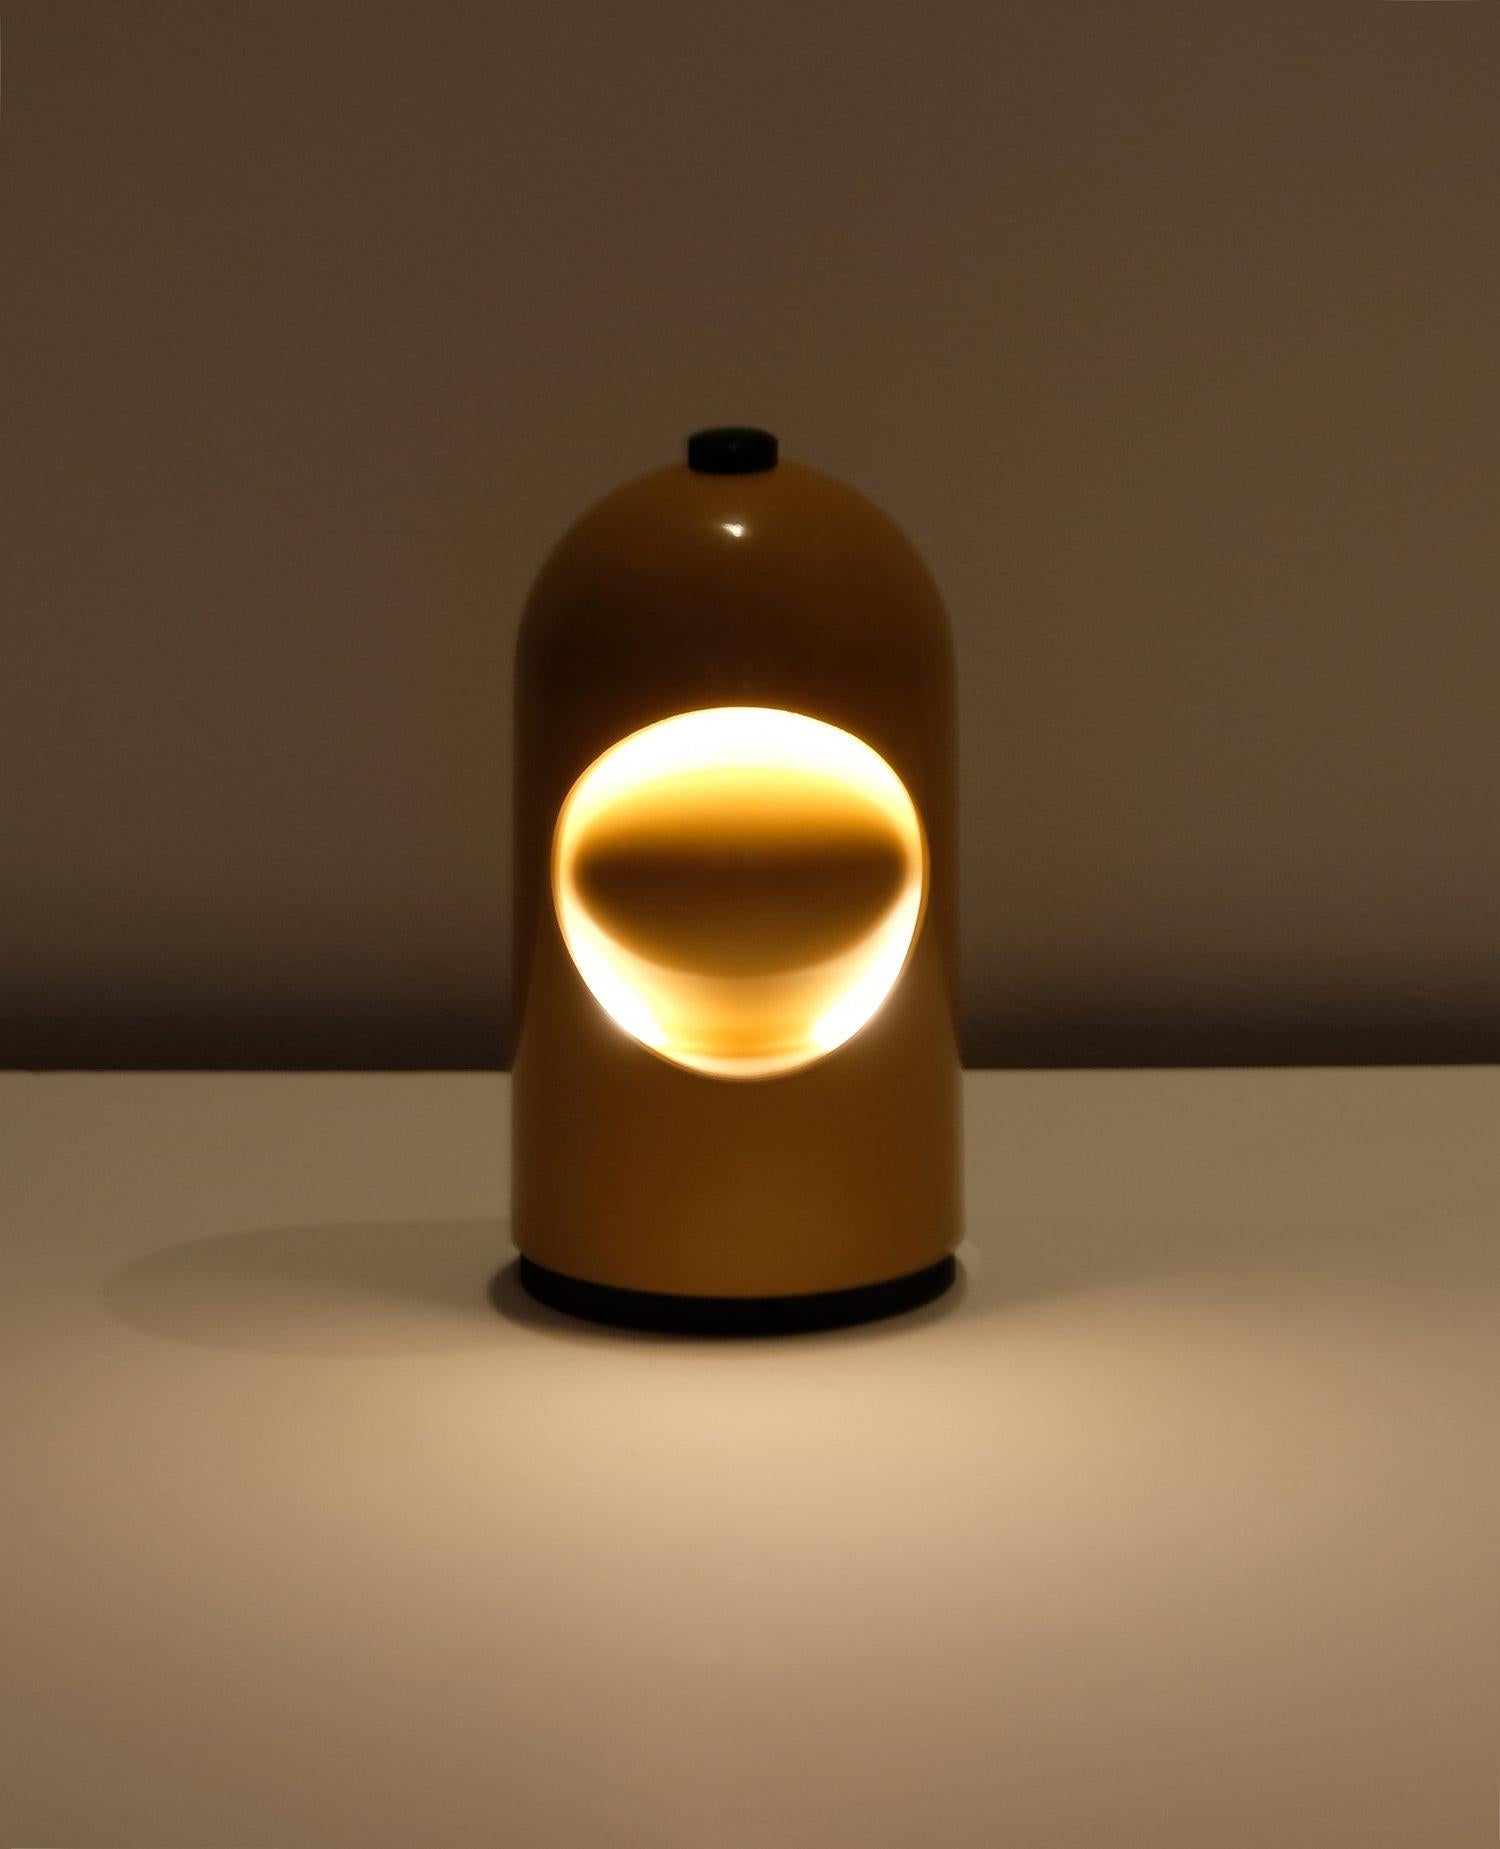 Ochre enameled Selene Eclipse lamp by ABM (this lamp was also manufactured for Lightolier’s USA market in the 1960’s). 

Tested original E-14 bulb European socket, cord, on/off switch, and grounded north American plug. Minor tarnish, dings, scuffs,